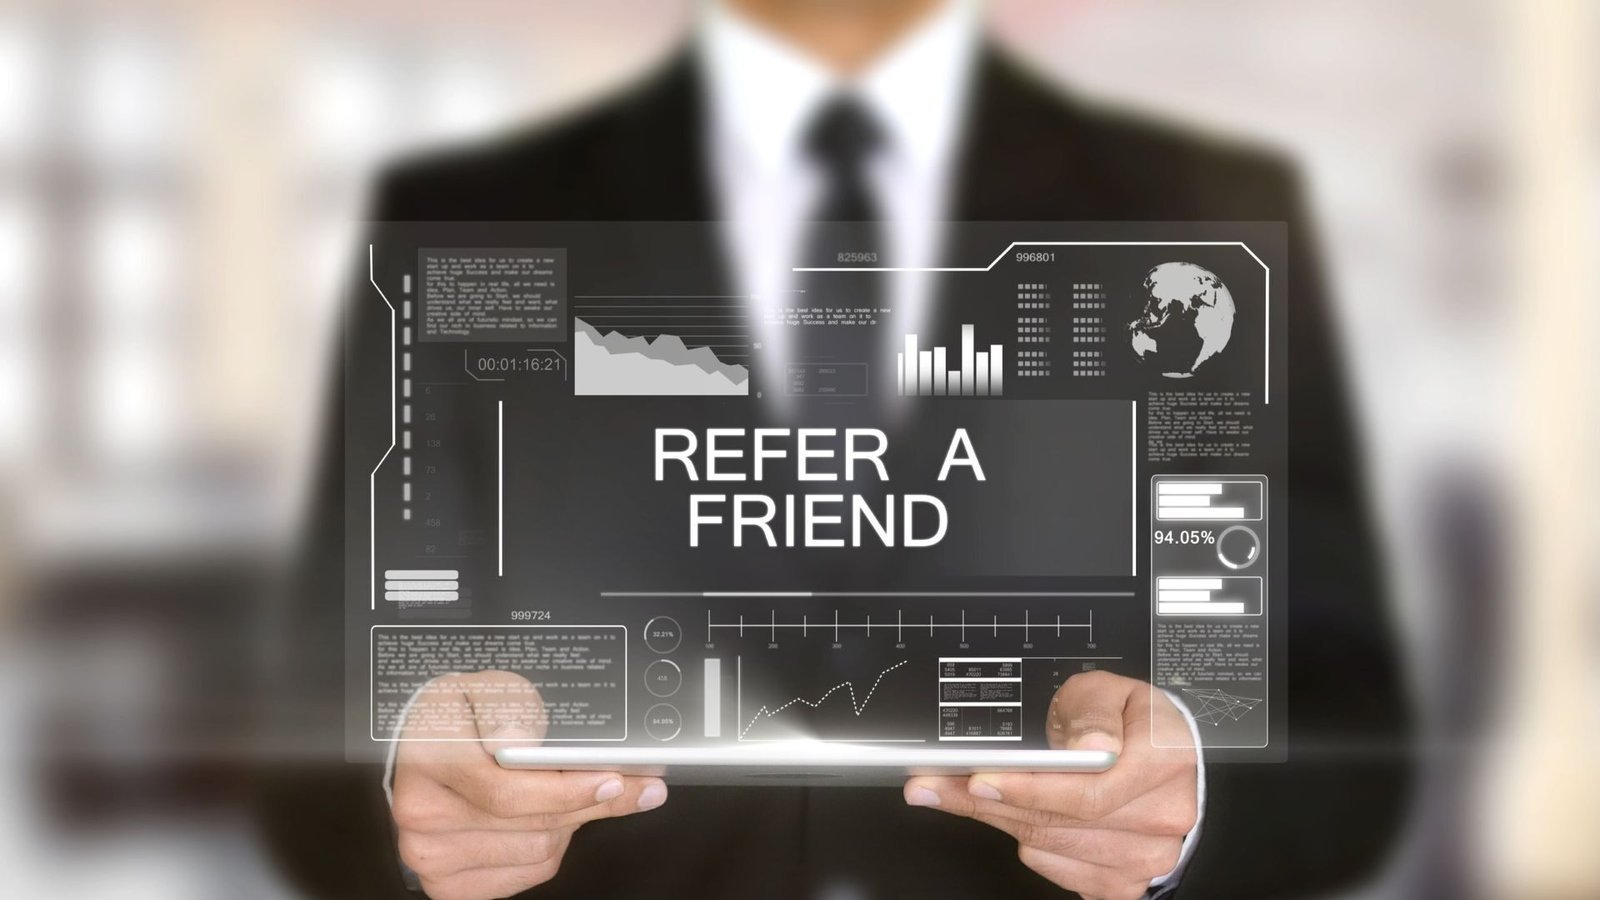 not-all-referral-programs-unique-referral-link-paypal's-referral-program-referral-marketing-choose-referral-programs-best-referral-programs-digital-services-referral-code-affiliate-marketers-marketing-strategy-referrals-sign